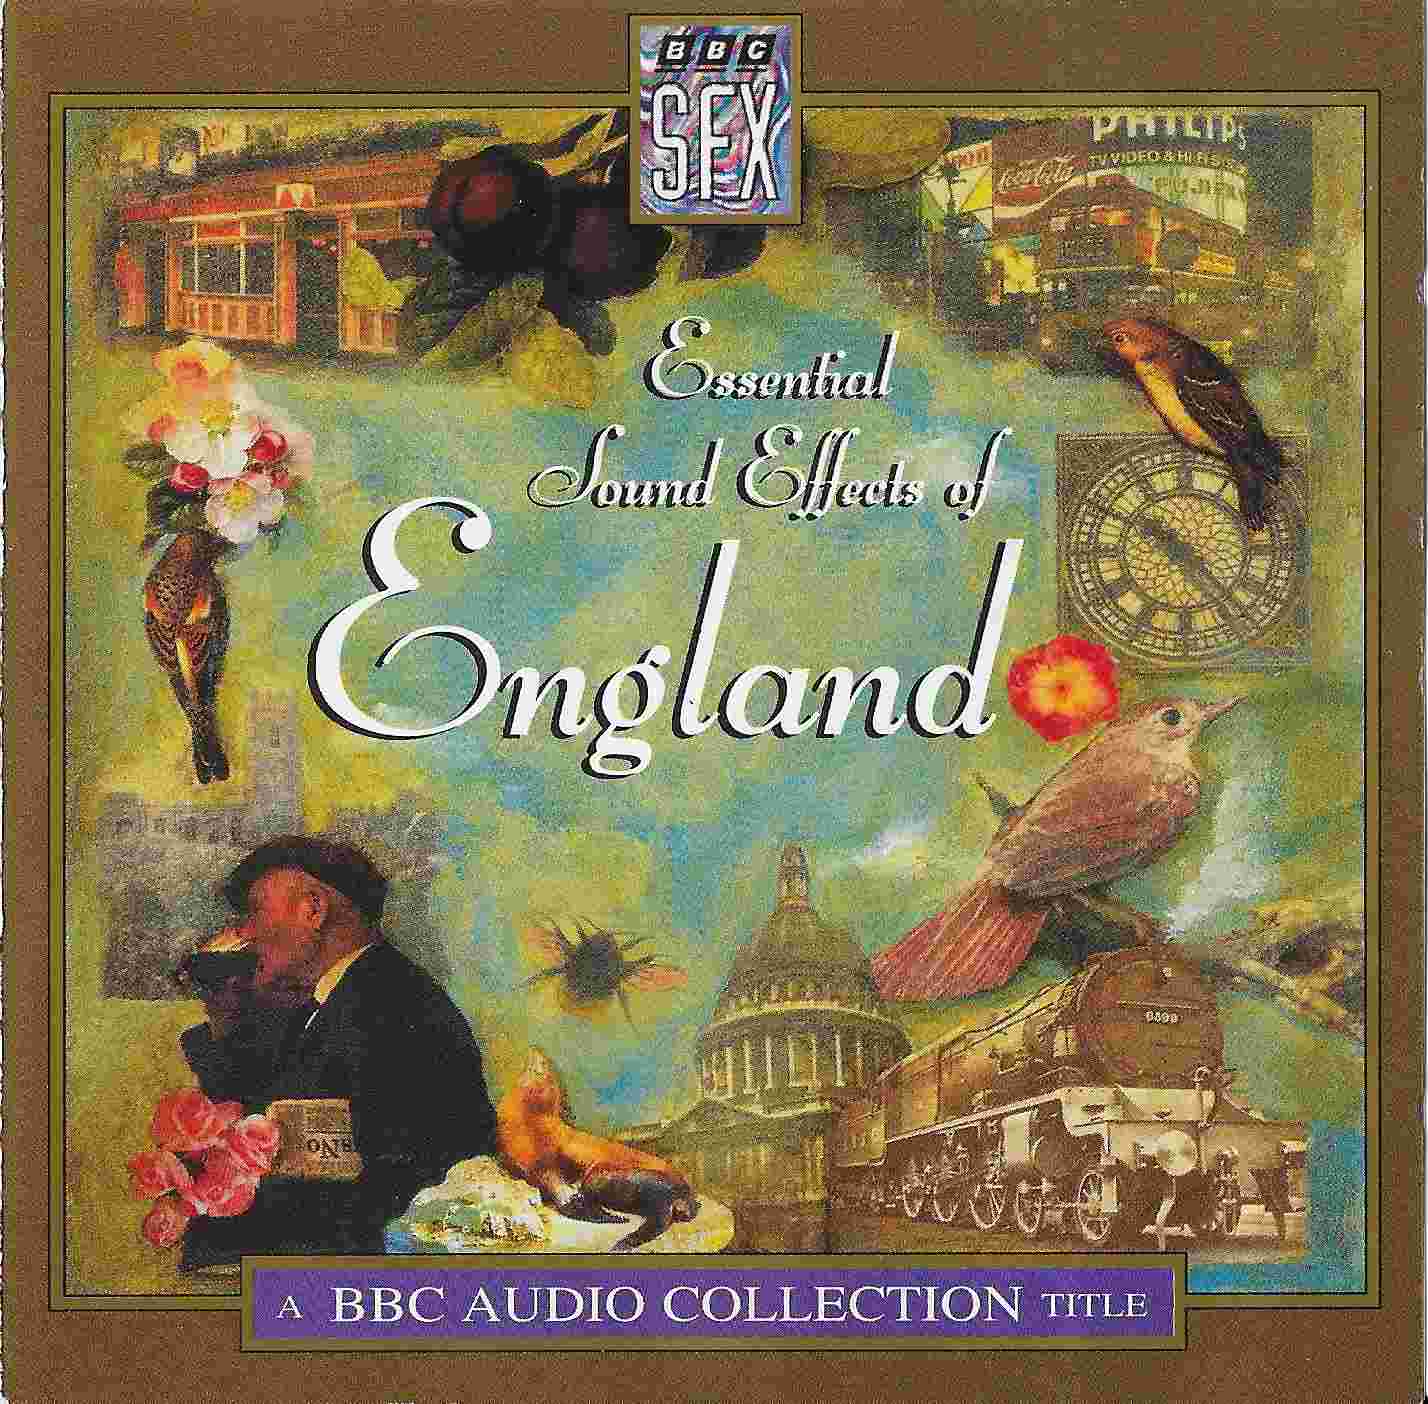 Picture of BBCCD867 Essential sound effects of England by artist Various from the BBC cds - Records and Tapes library